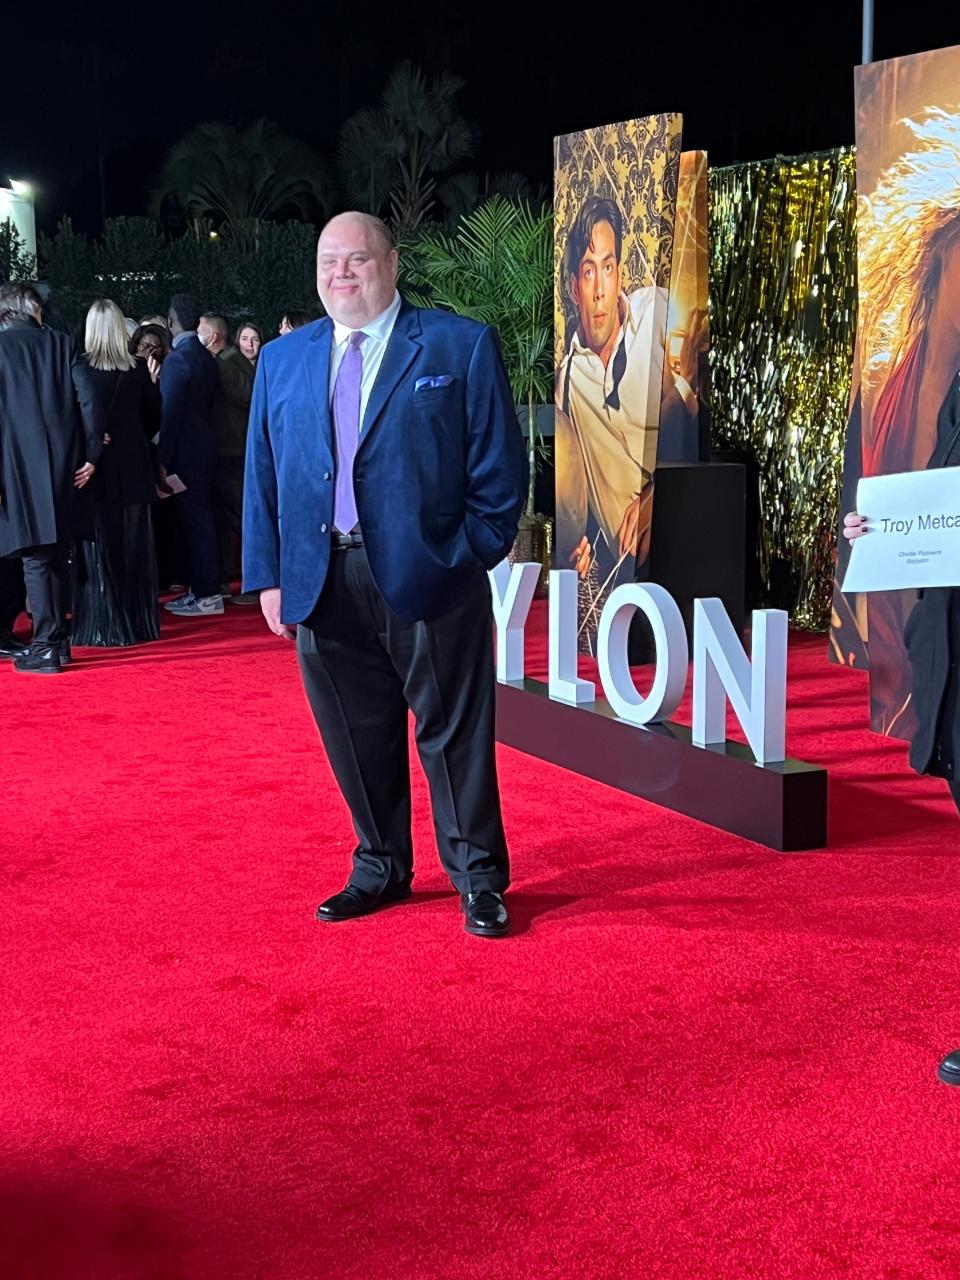 Missouri State graduate and Columbia native Troy Metcalf on the red carpet for the world premier of "Babylon" in Los Angeles.